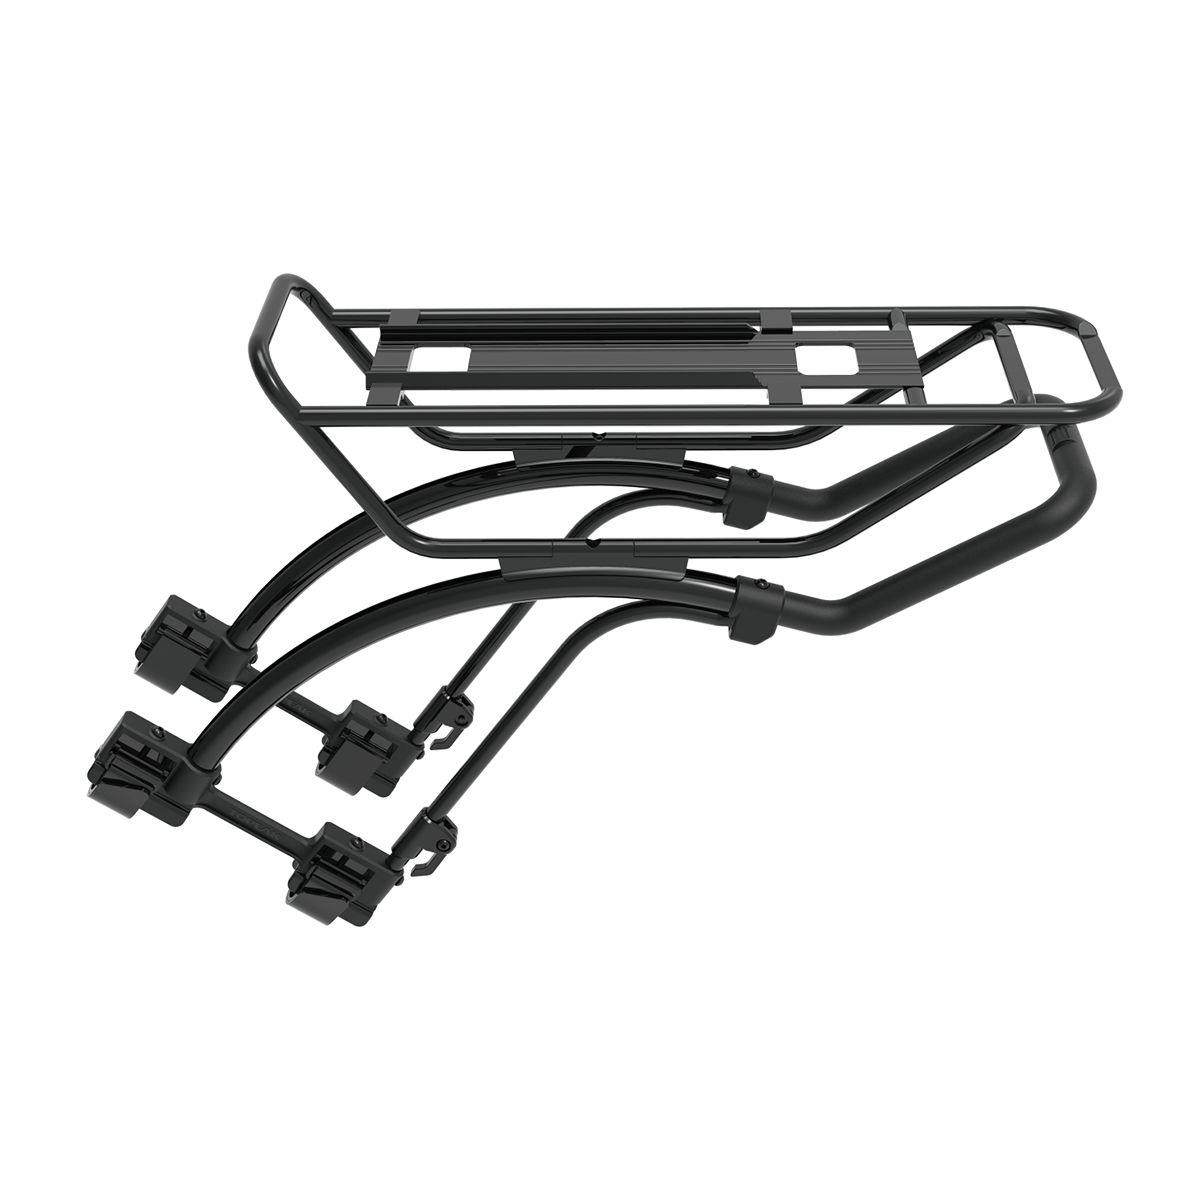 Universal Rack Tetrarack M2L with integrated QuickTrack system